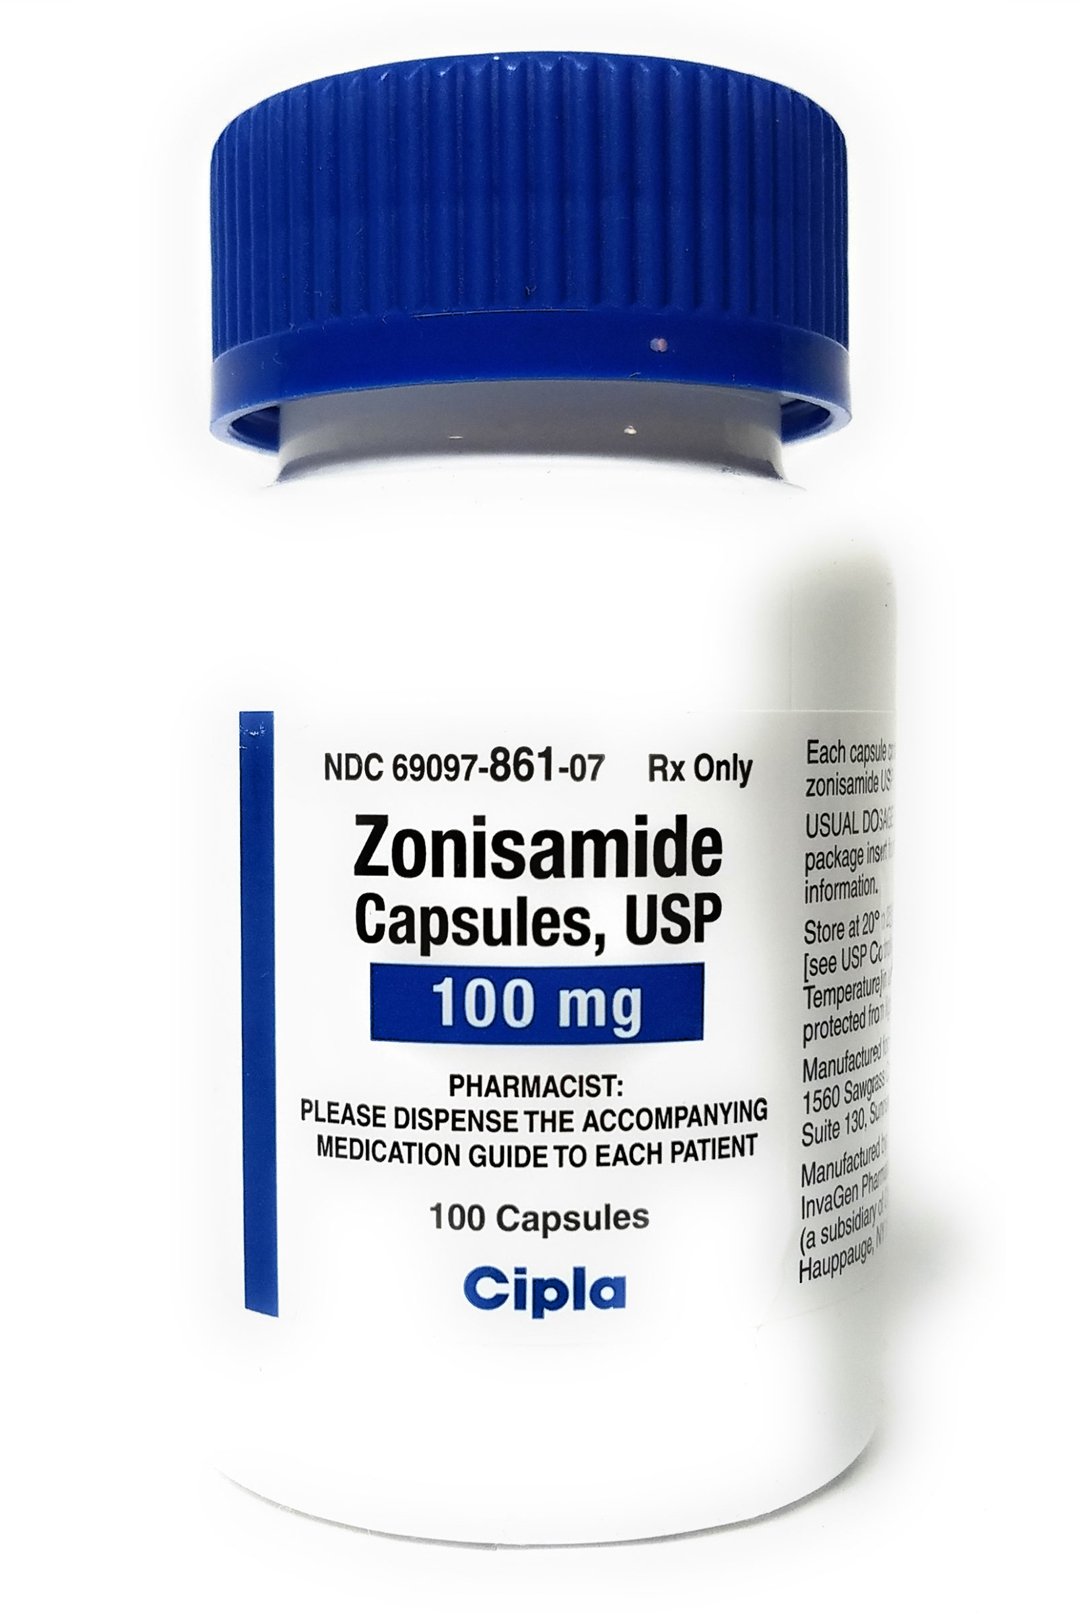 Zonisamide for dogs